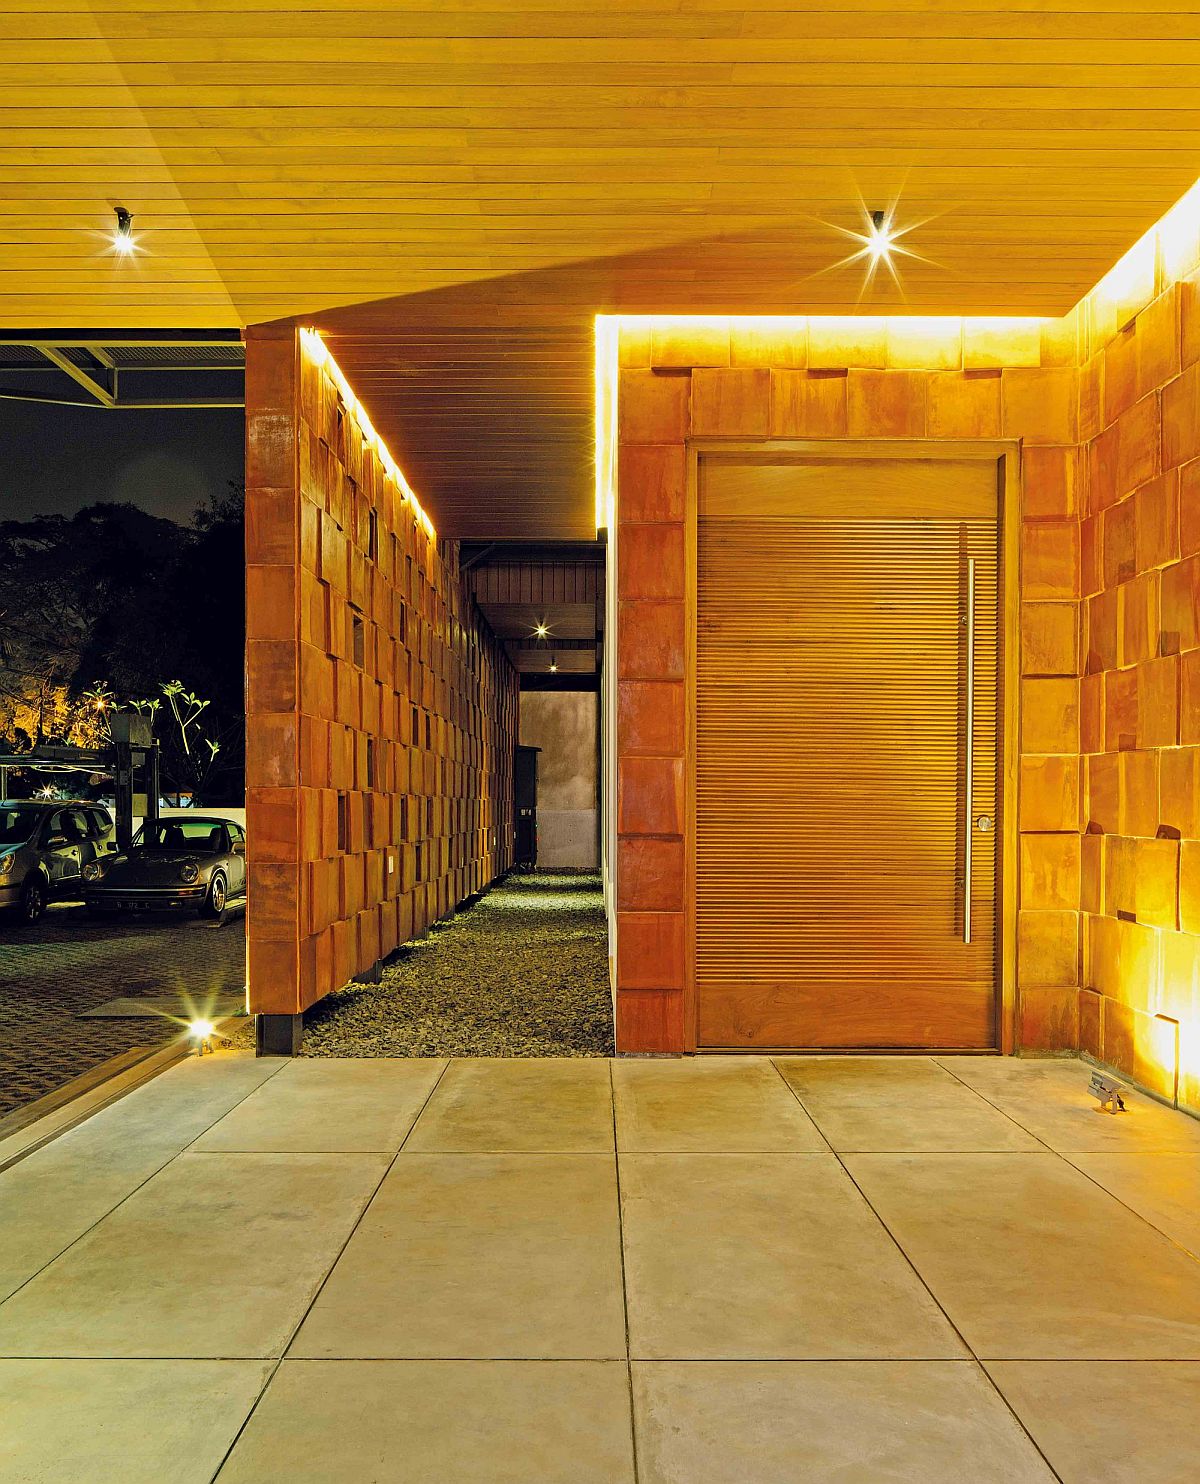 Beautifully lit entrance of the Indonesian home